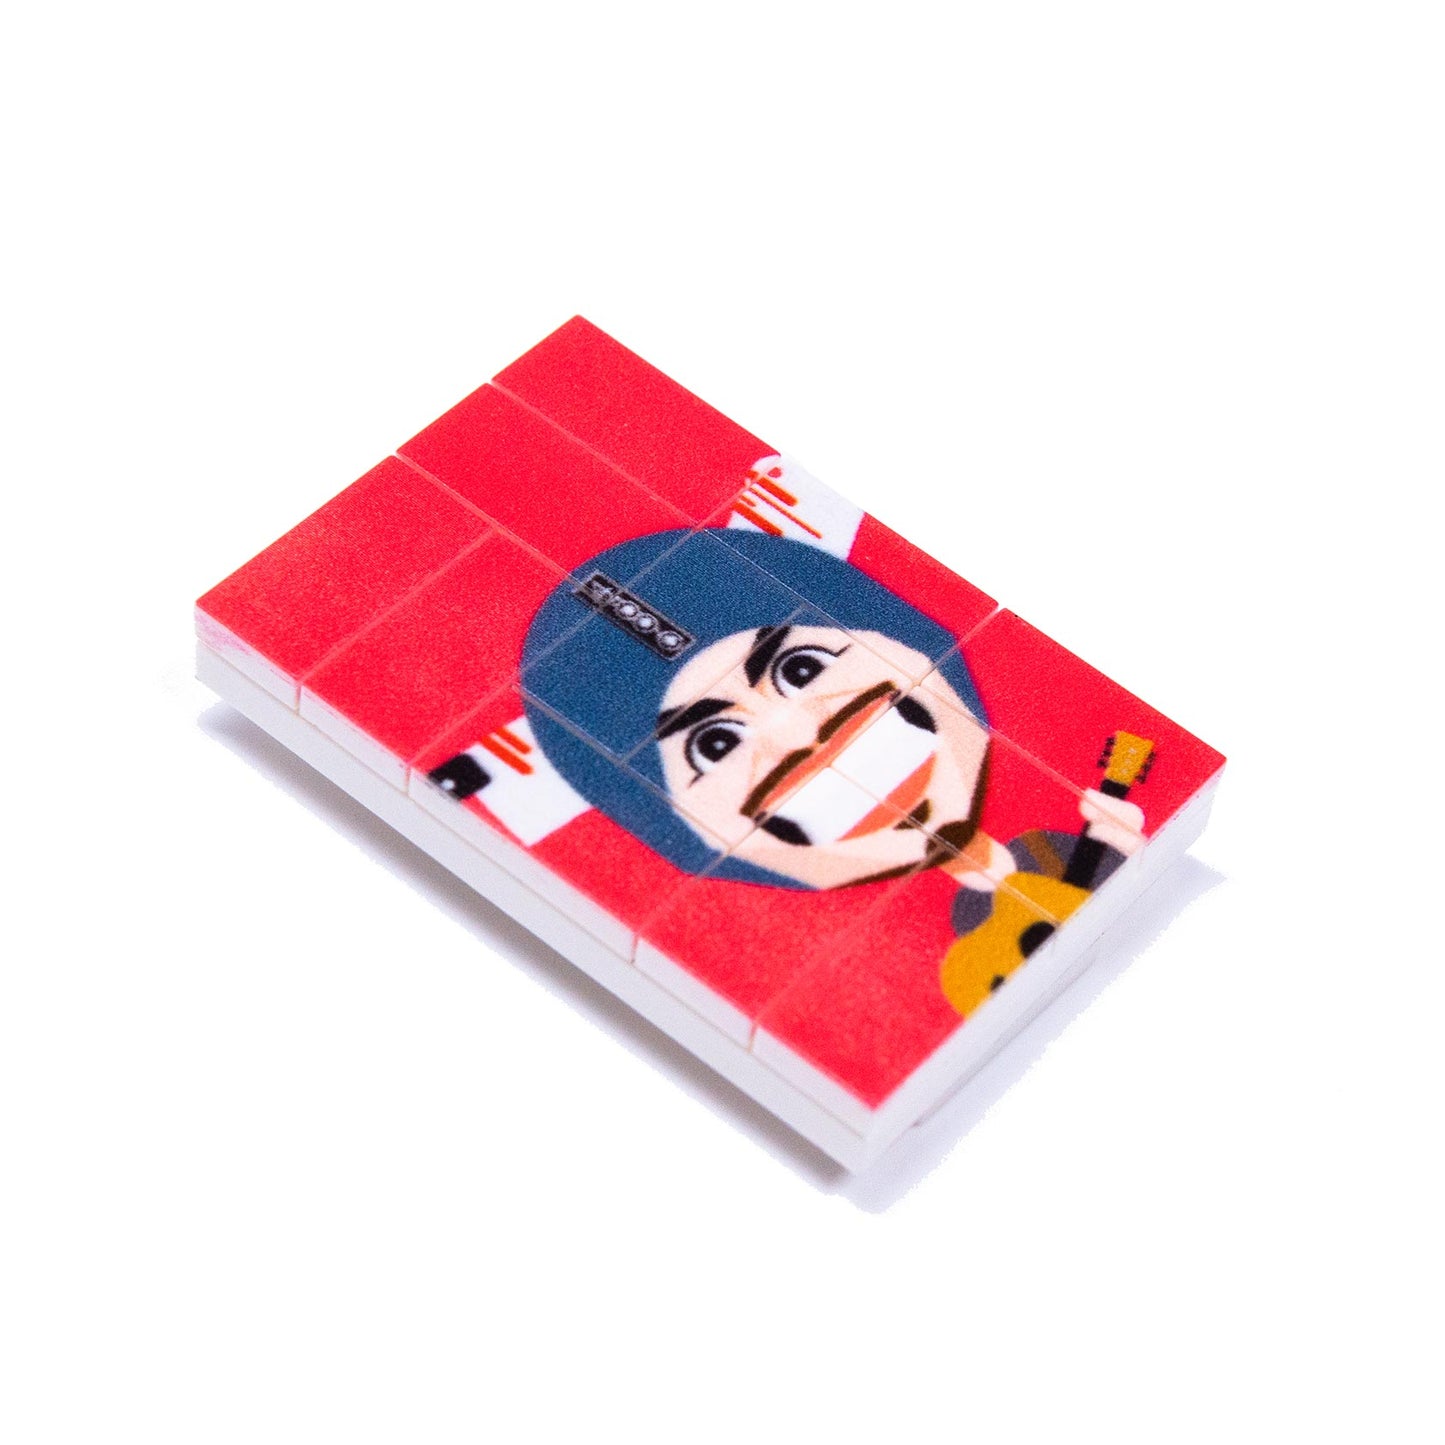 4896 x Namewee Magnet Mini Puzzle (Red)